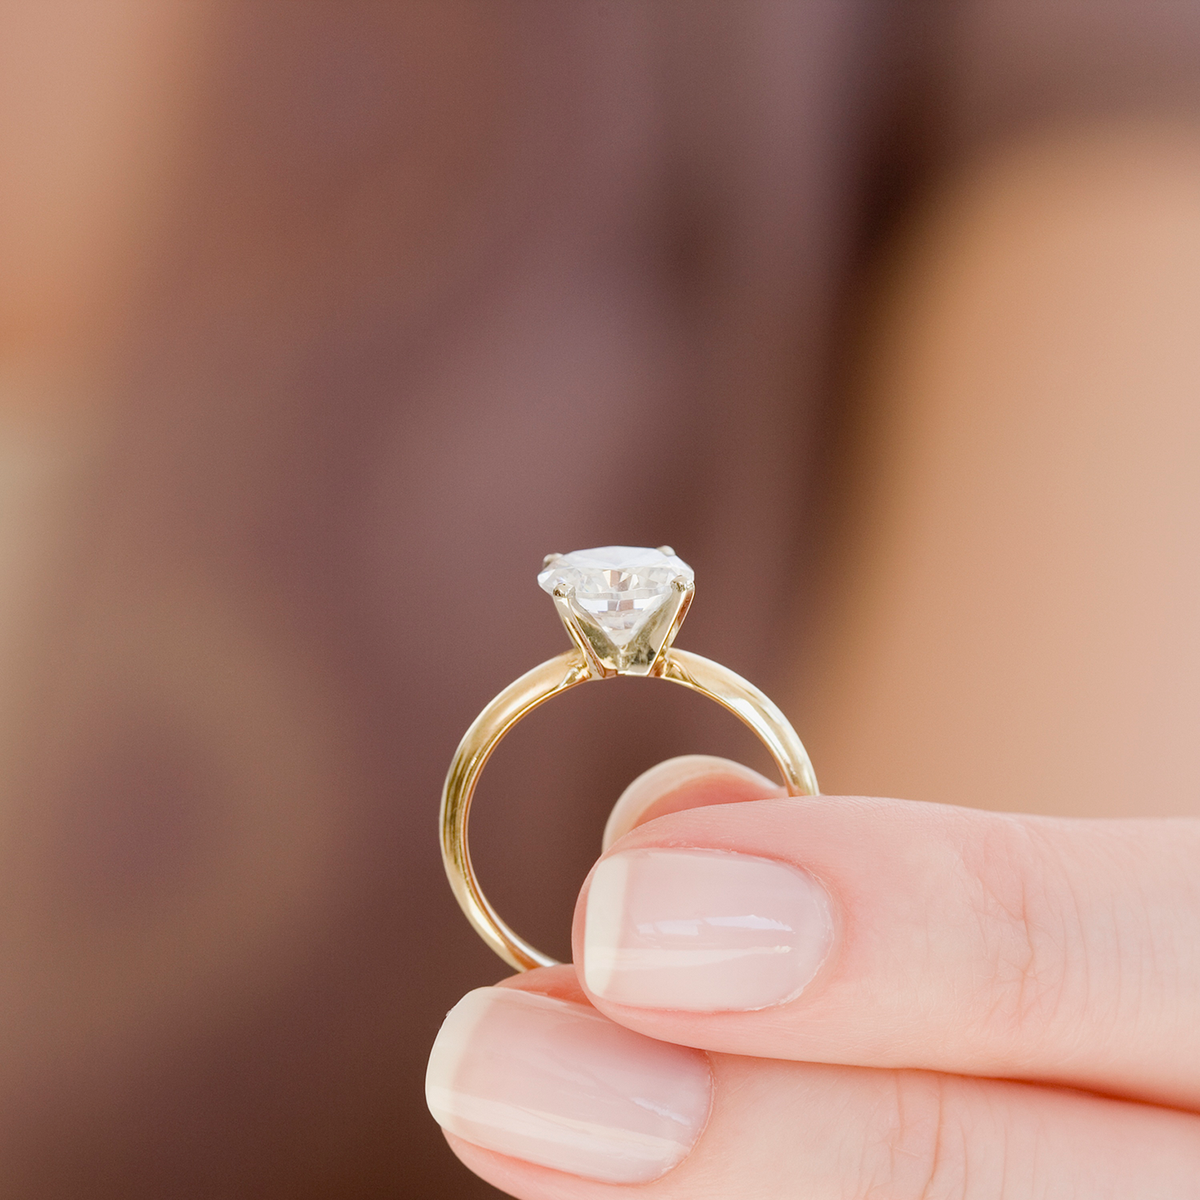 The Best Engagement Rings for Active Women